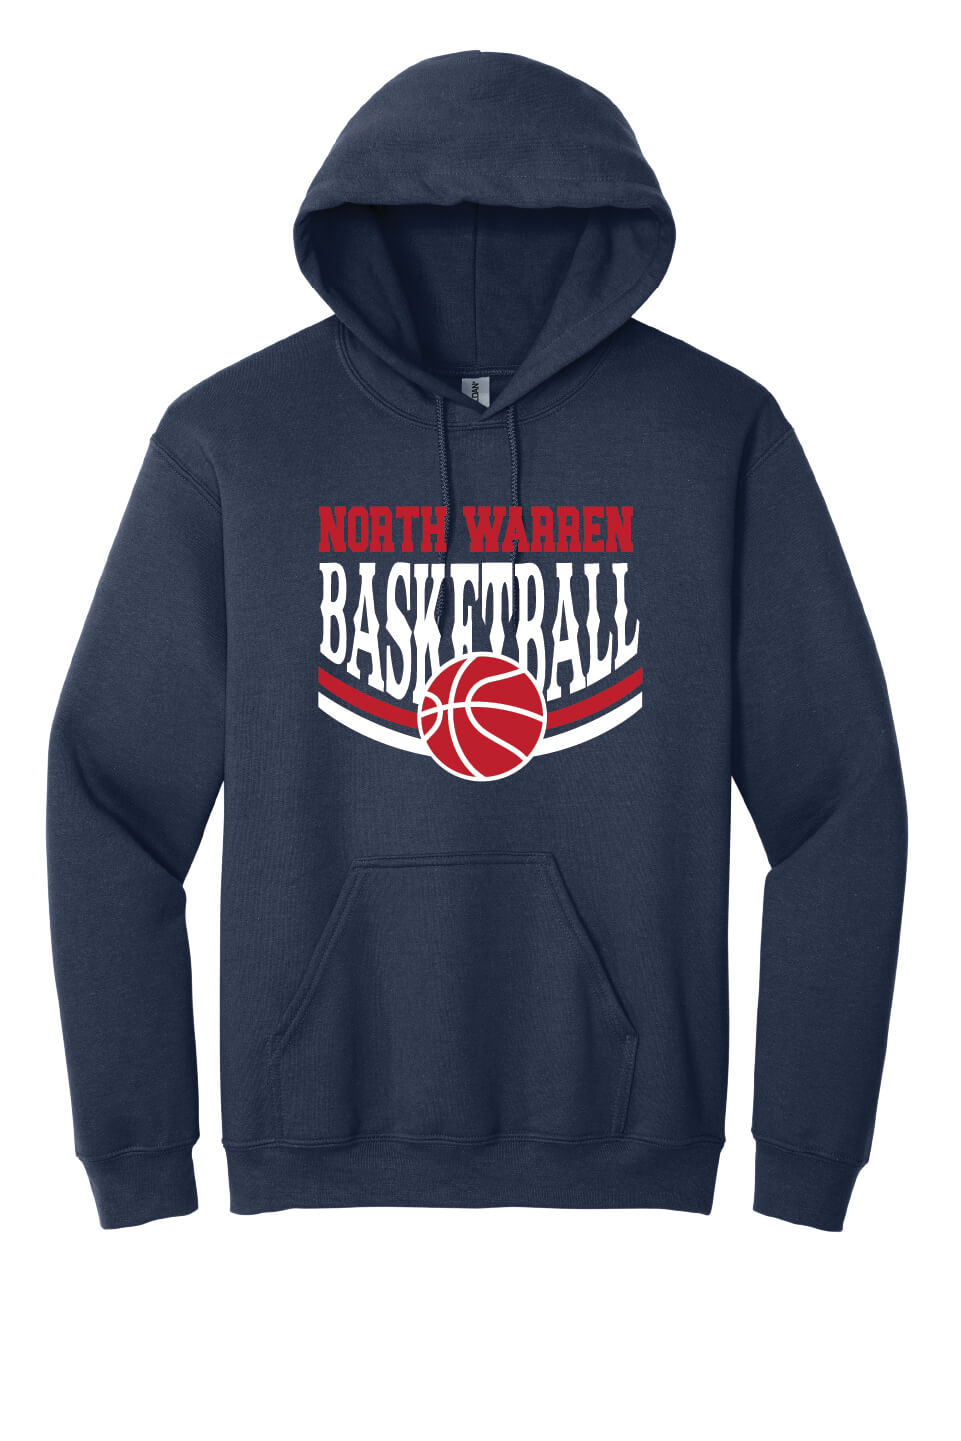 NW Basketball Hoodie (Youth) navy